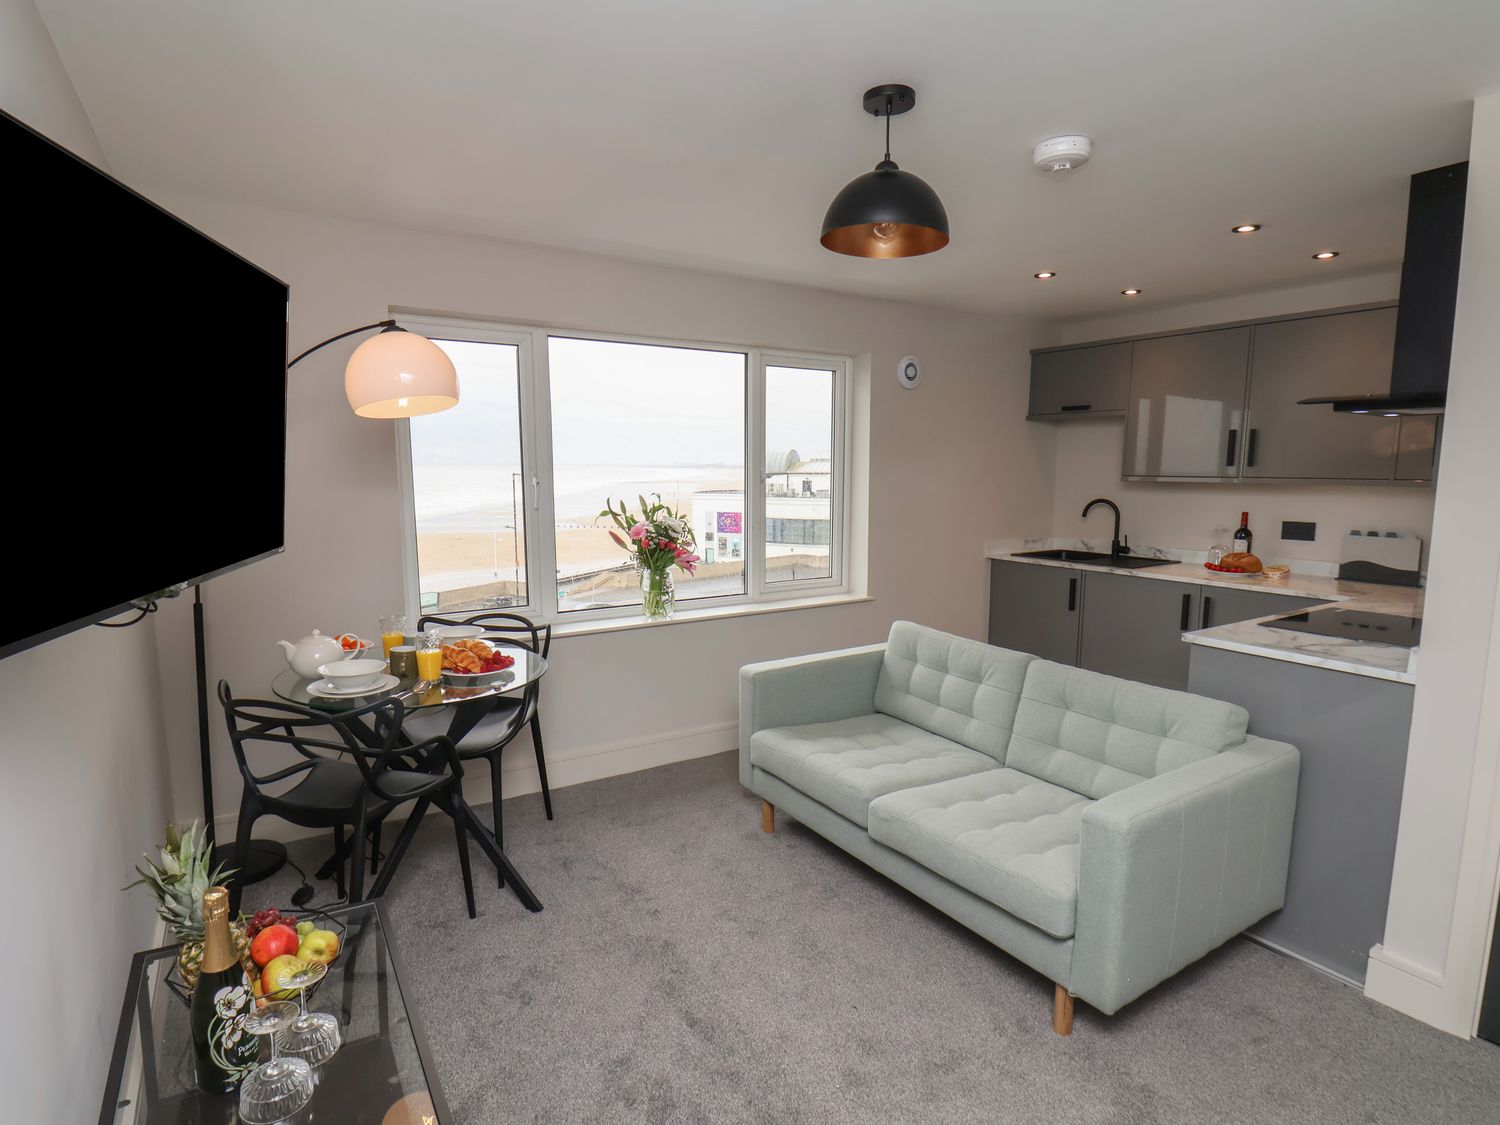 Apt 8 @ Hunter's Quay - North Yorkshire (incl. Whitby) - 1144478 - photo 1